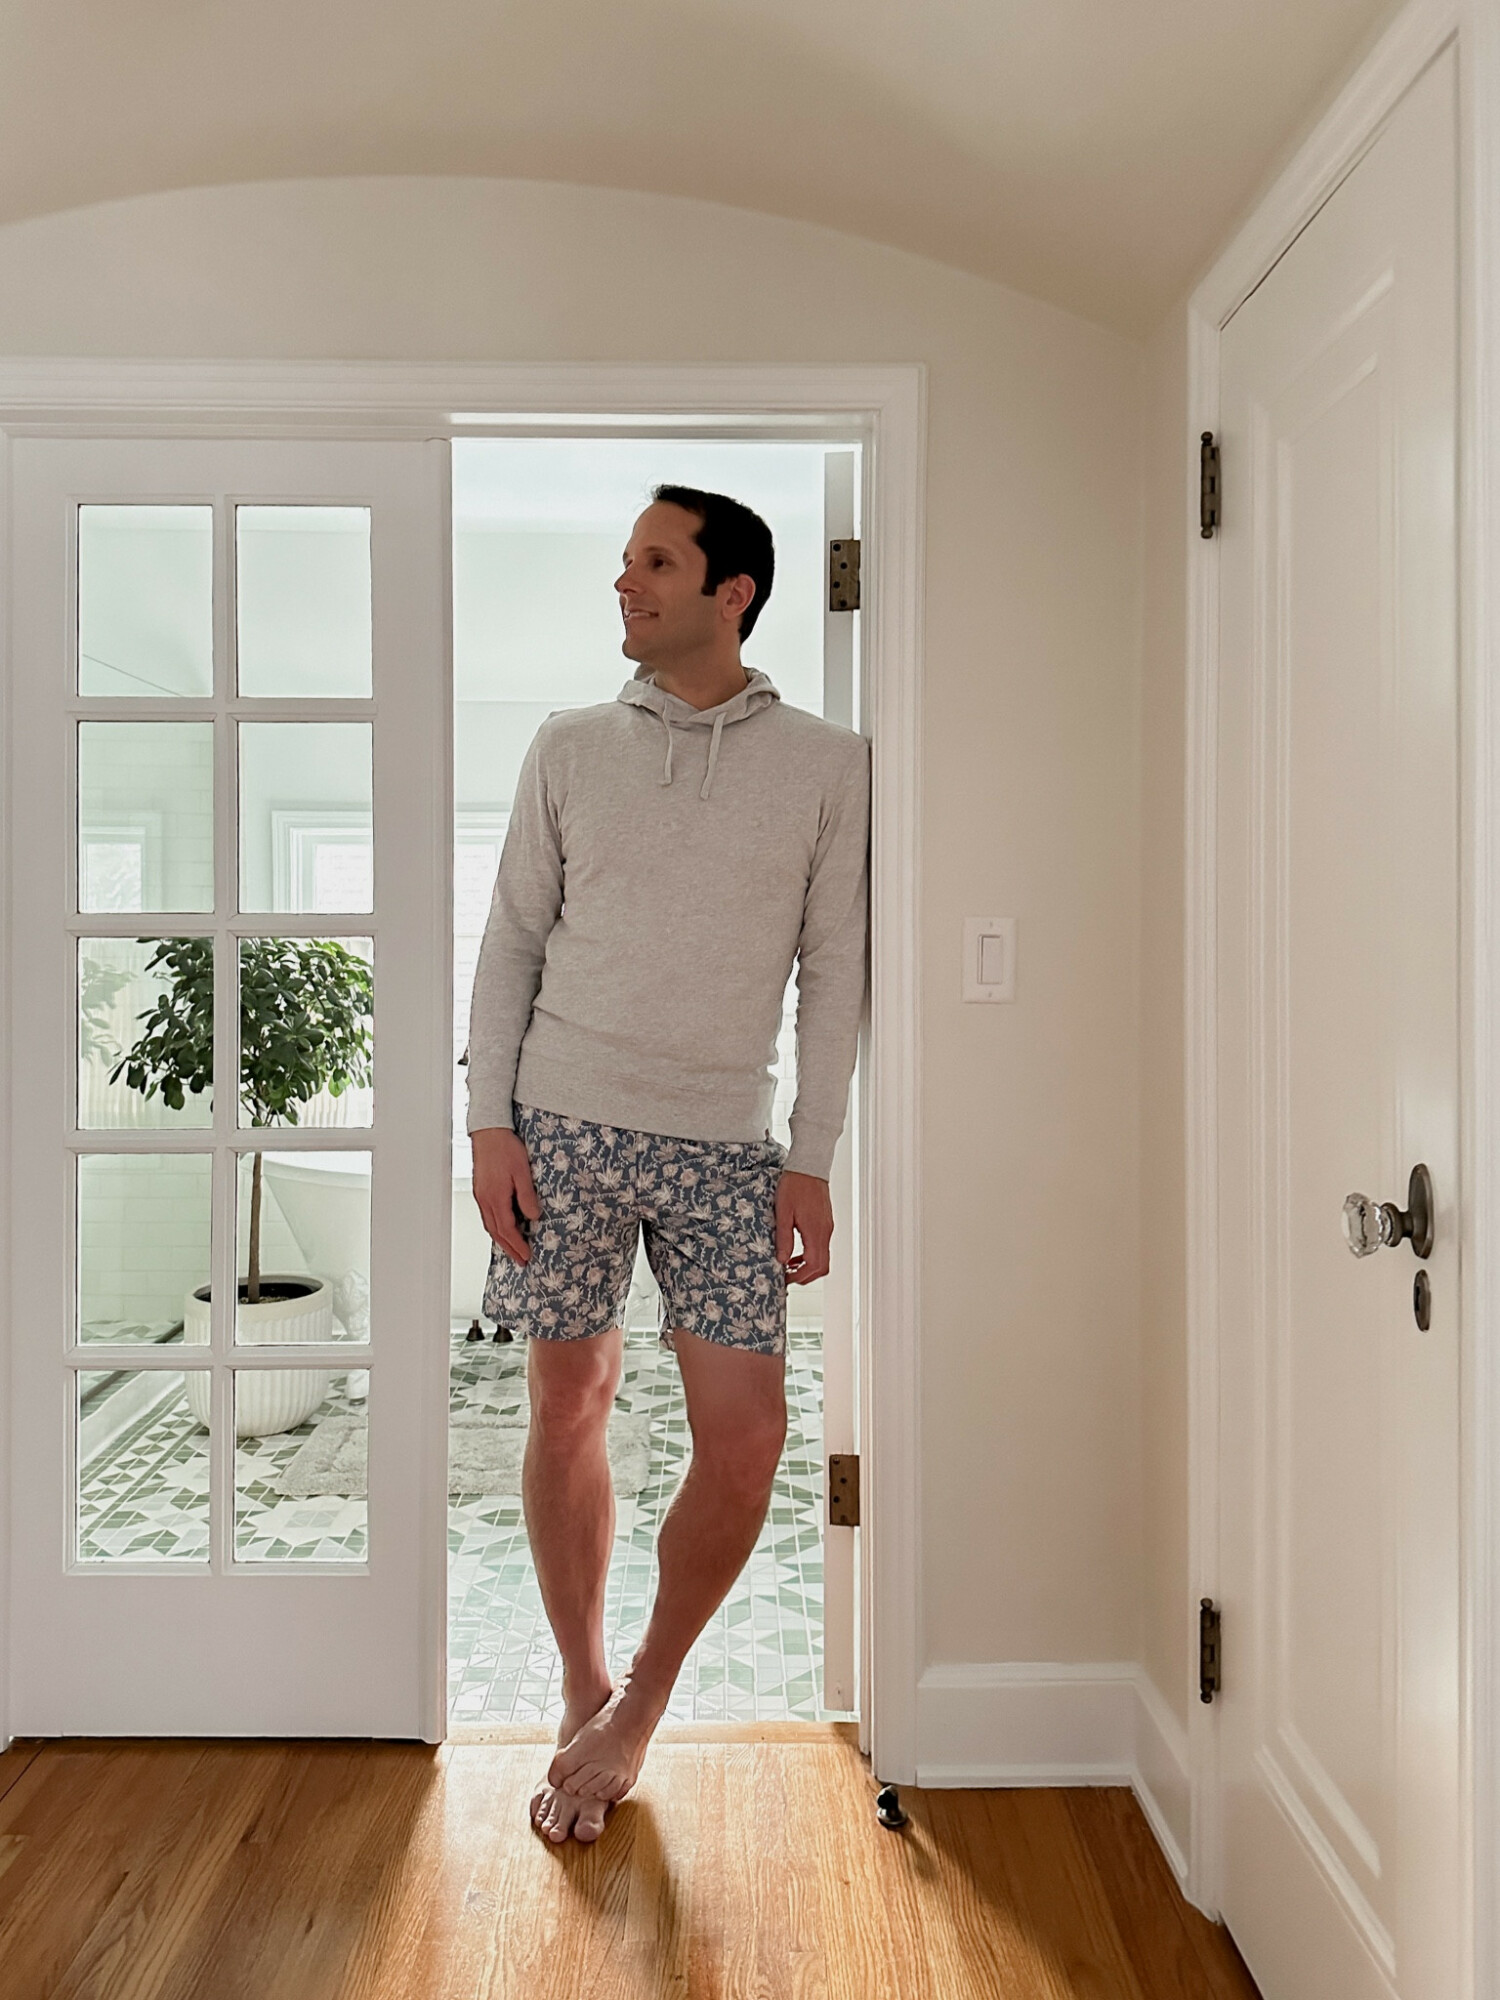 Brian picked this outfit for Charleston from Faherty. The past decade had long baggy shorts for men so I’m liking this more fitted, tailored style. This sweater is a basic essential + very comfortable - comes in several colors. My code: PATTI20 will get you 20% off your Faherty order for the next 72 hrs! men’s shorts, men’s sweater #springoutfit #mensfashion #LTKFind #LTKstyletip #LTKsalealert